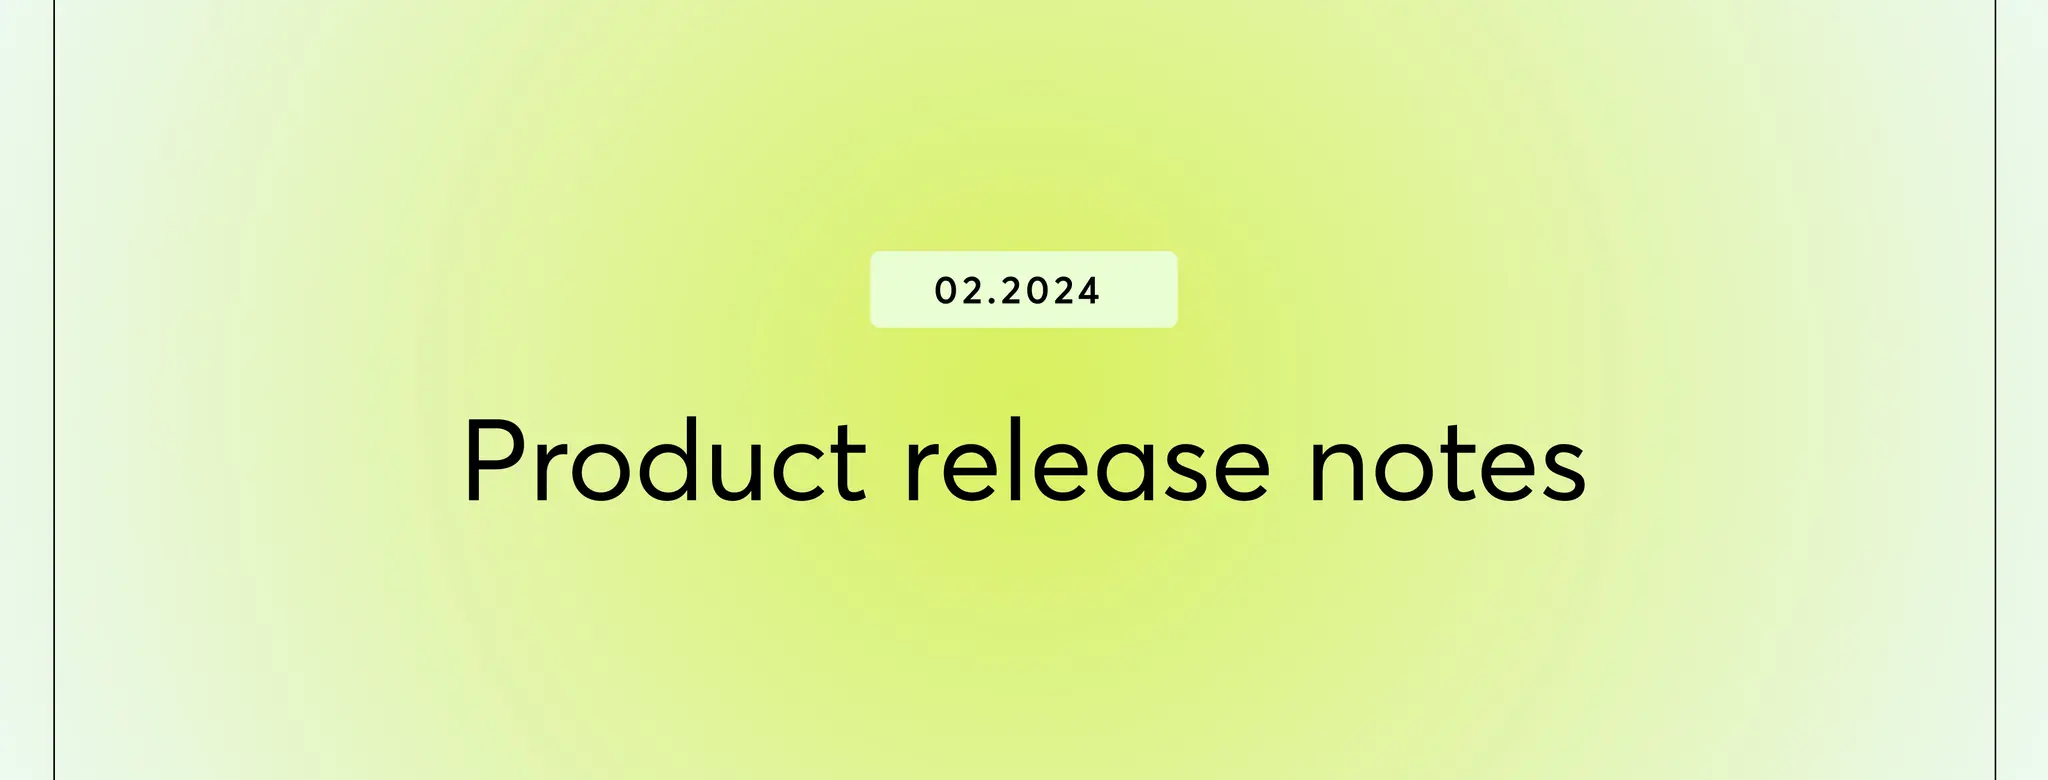 text-based graphic saying February 2024 and Product release notes